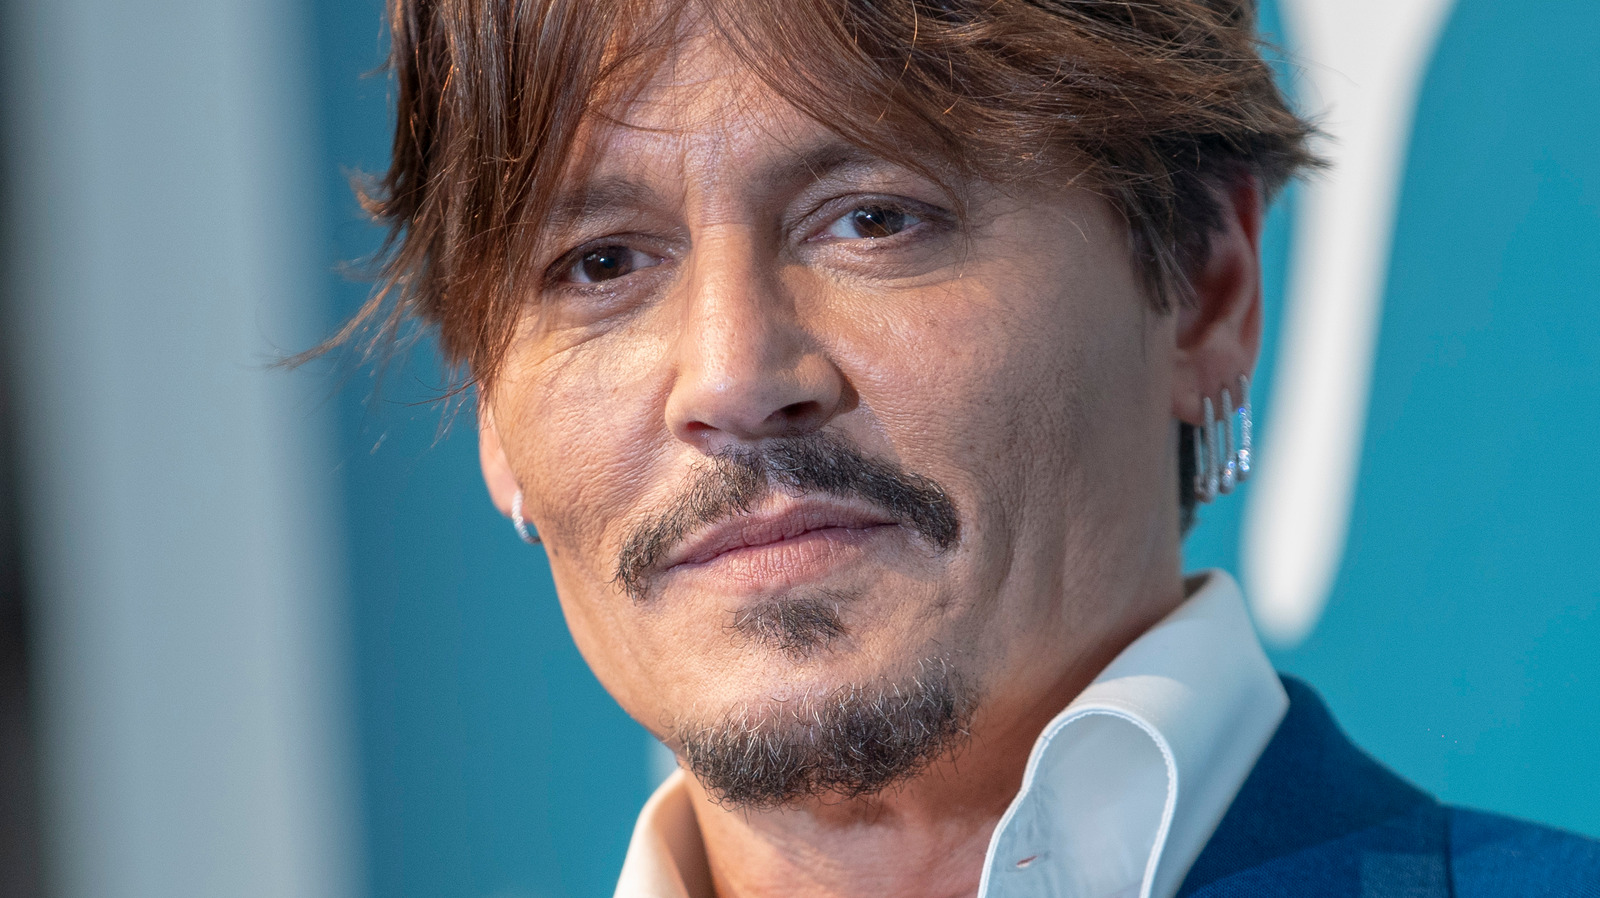 Johnny Depp’s Lawyer Camille Vasquez Reveals What She Really Thinks About Those Romance Rumors